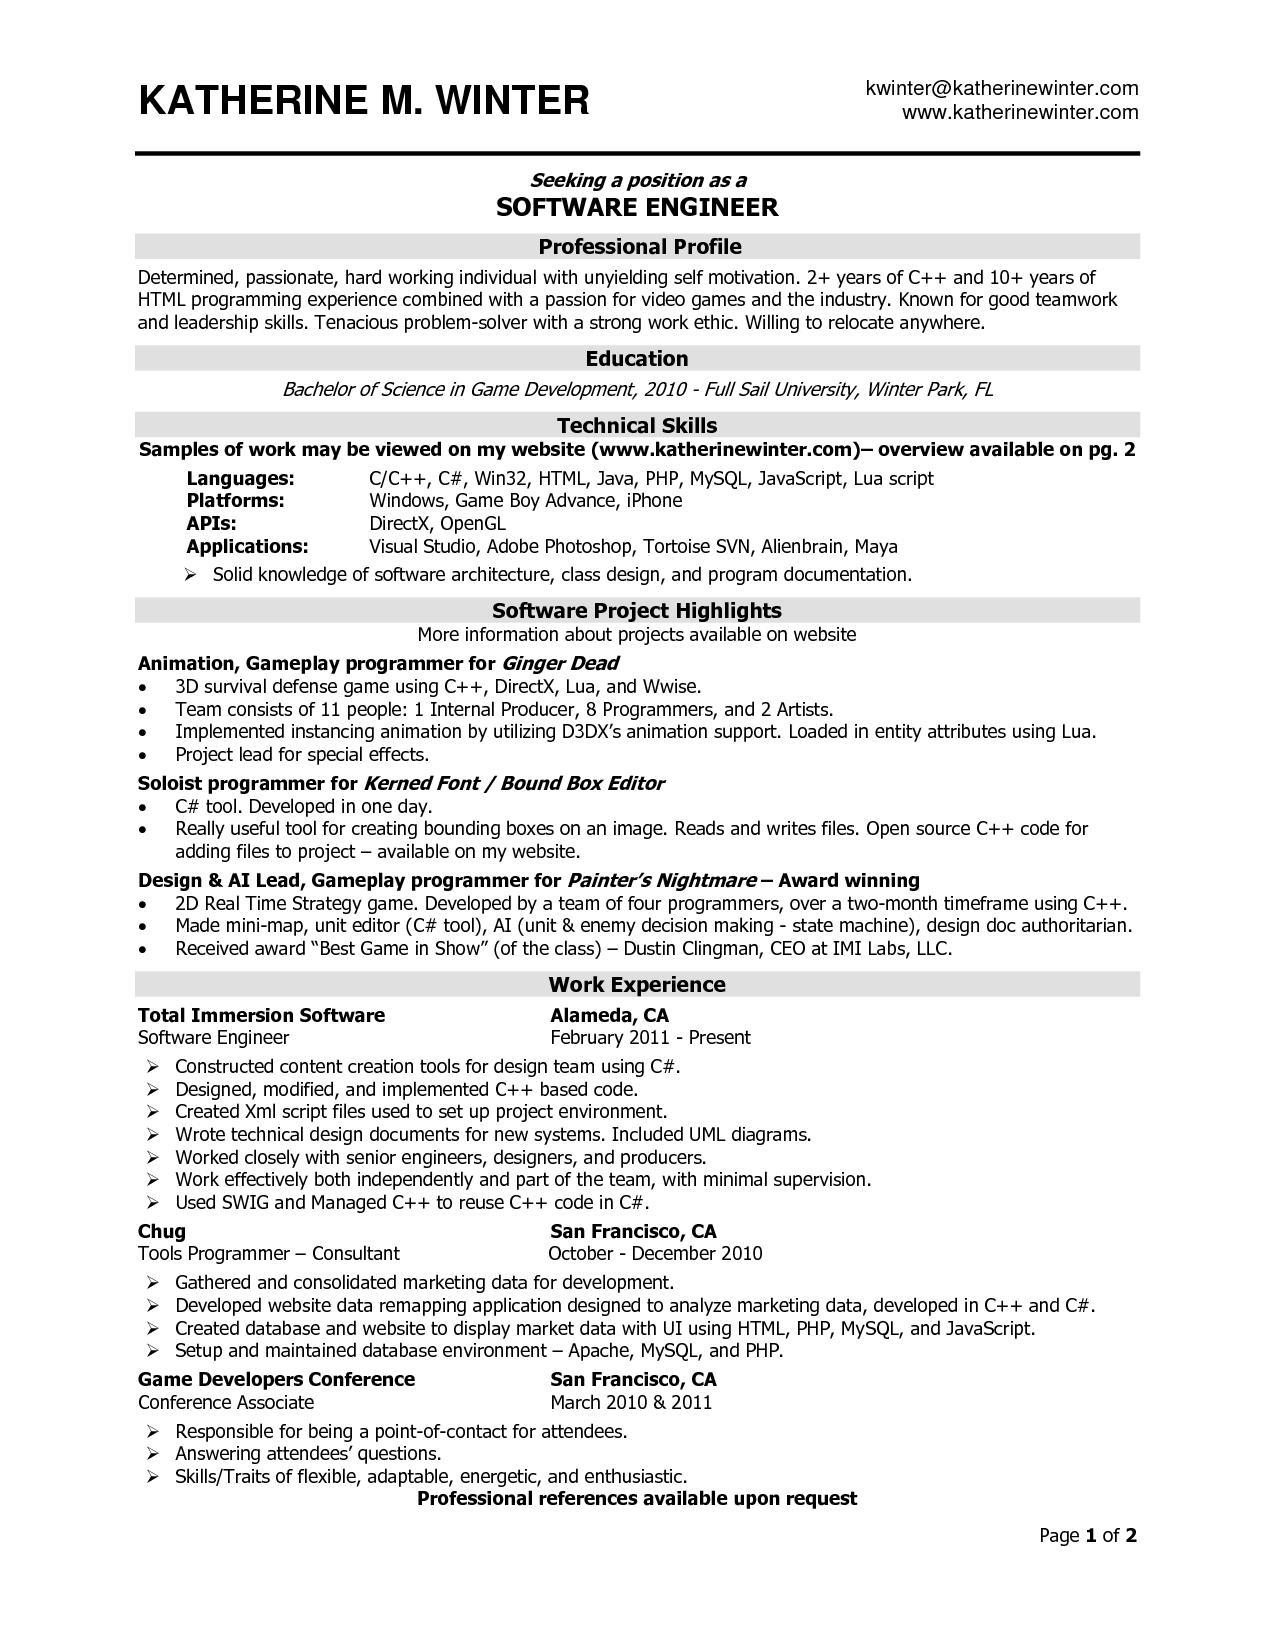 Resume samples for experienced software engineer